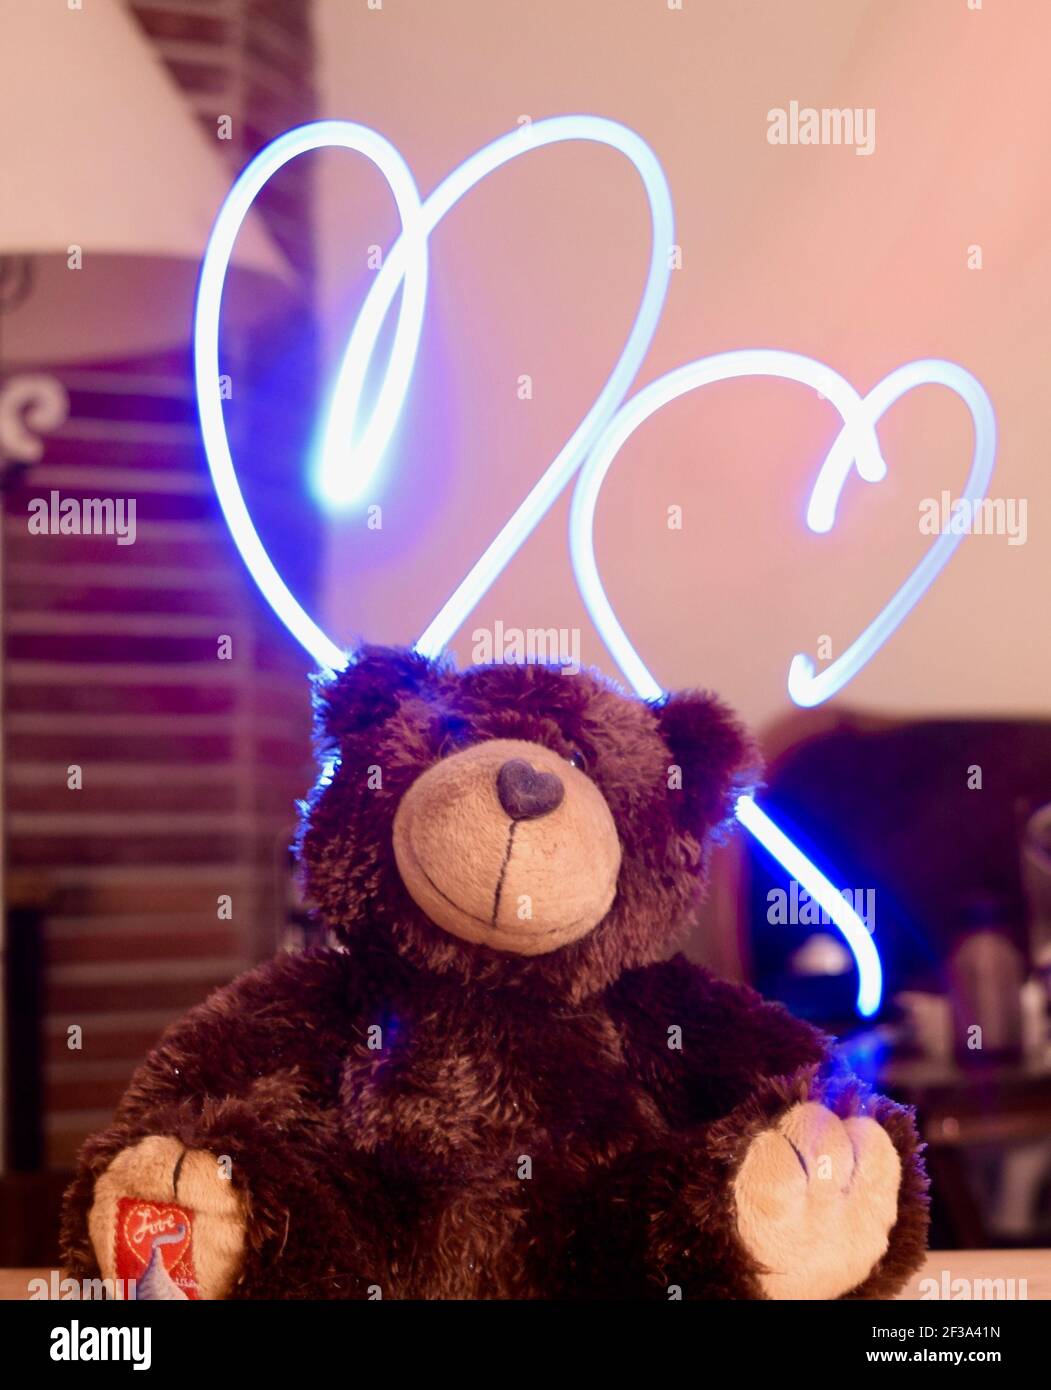 FRESNO, UNITED STATES - Apr 23, 2016: A photo of a light painting of two hearts over a cute stuffed colored brown bear in the home Stock Photo